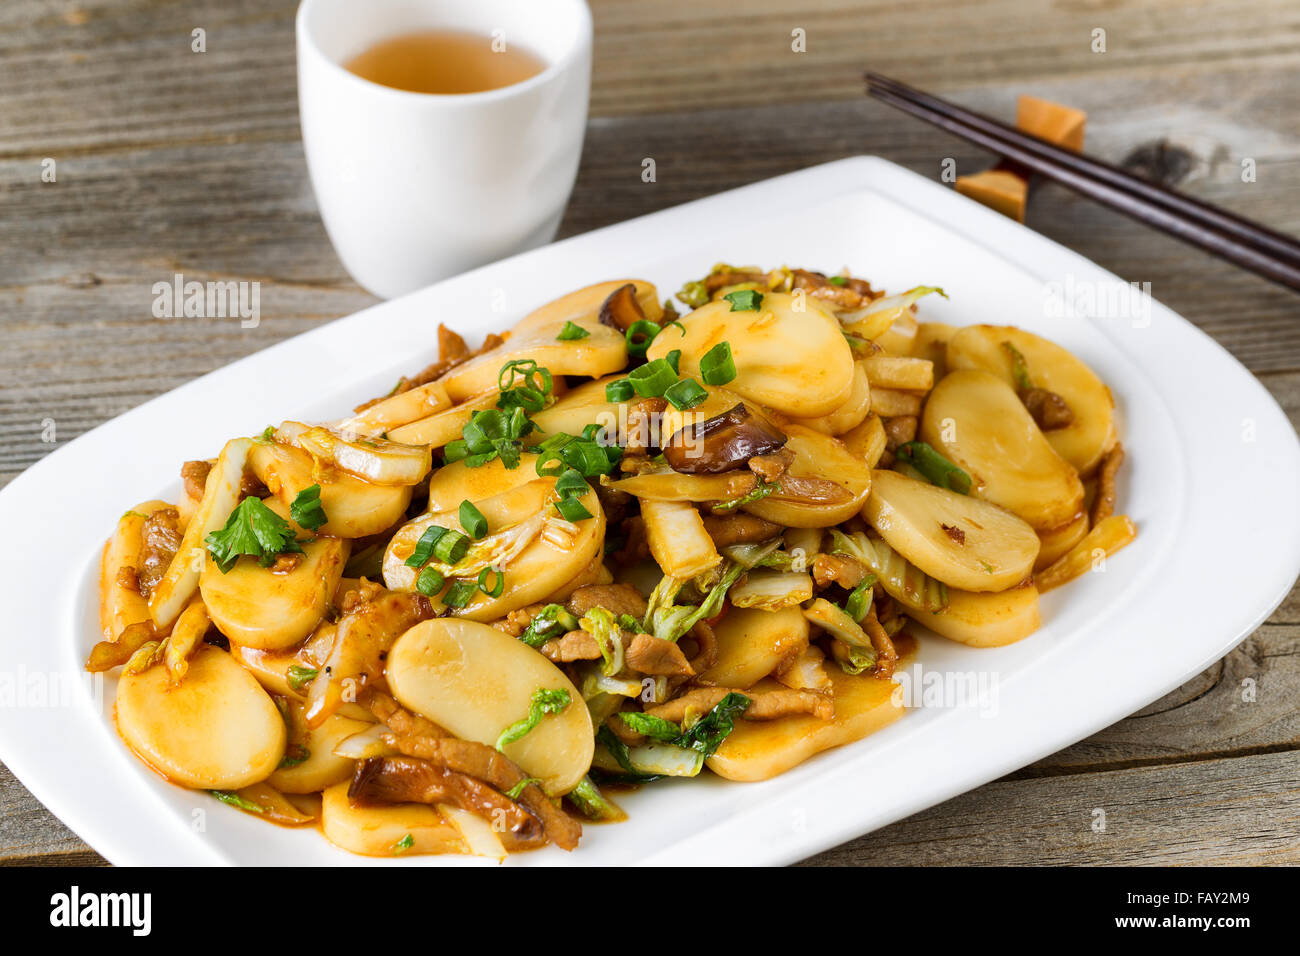 Close up front view of stir fry consisting of sliced sticky rice, onion, mushroom, and chicken. Chopsticks and tea in background Stock Photo